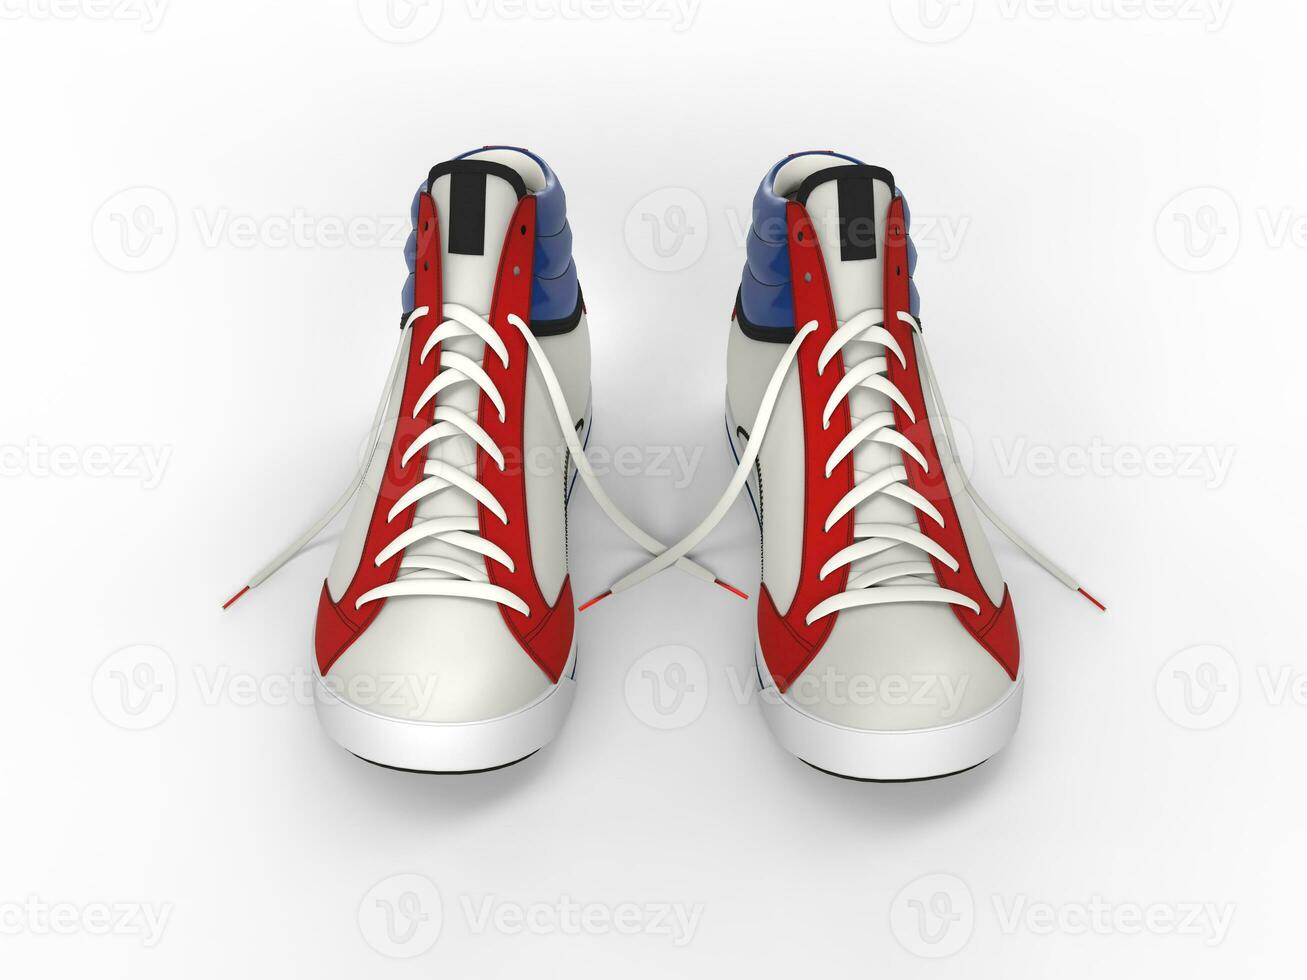 Pair of stylish modern sneakers - front top view - isolated on white background photo